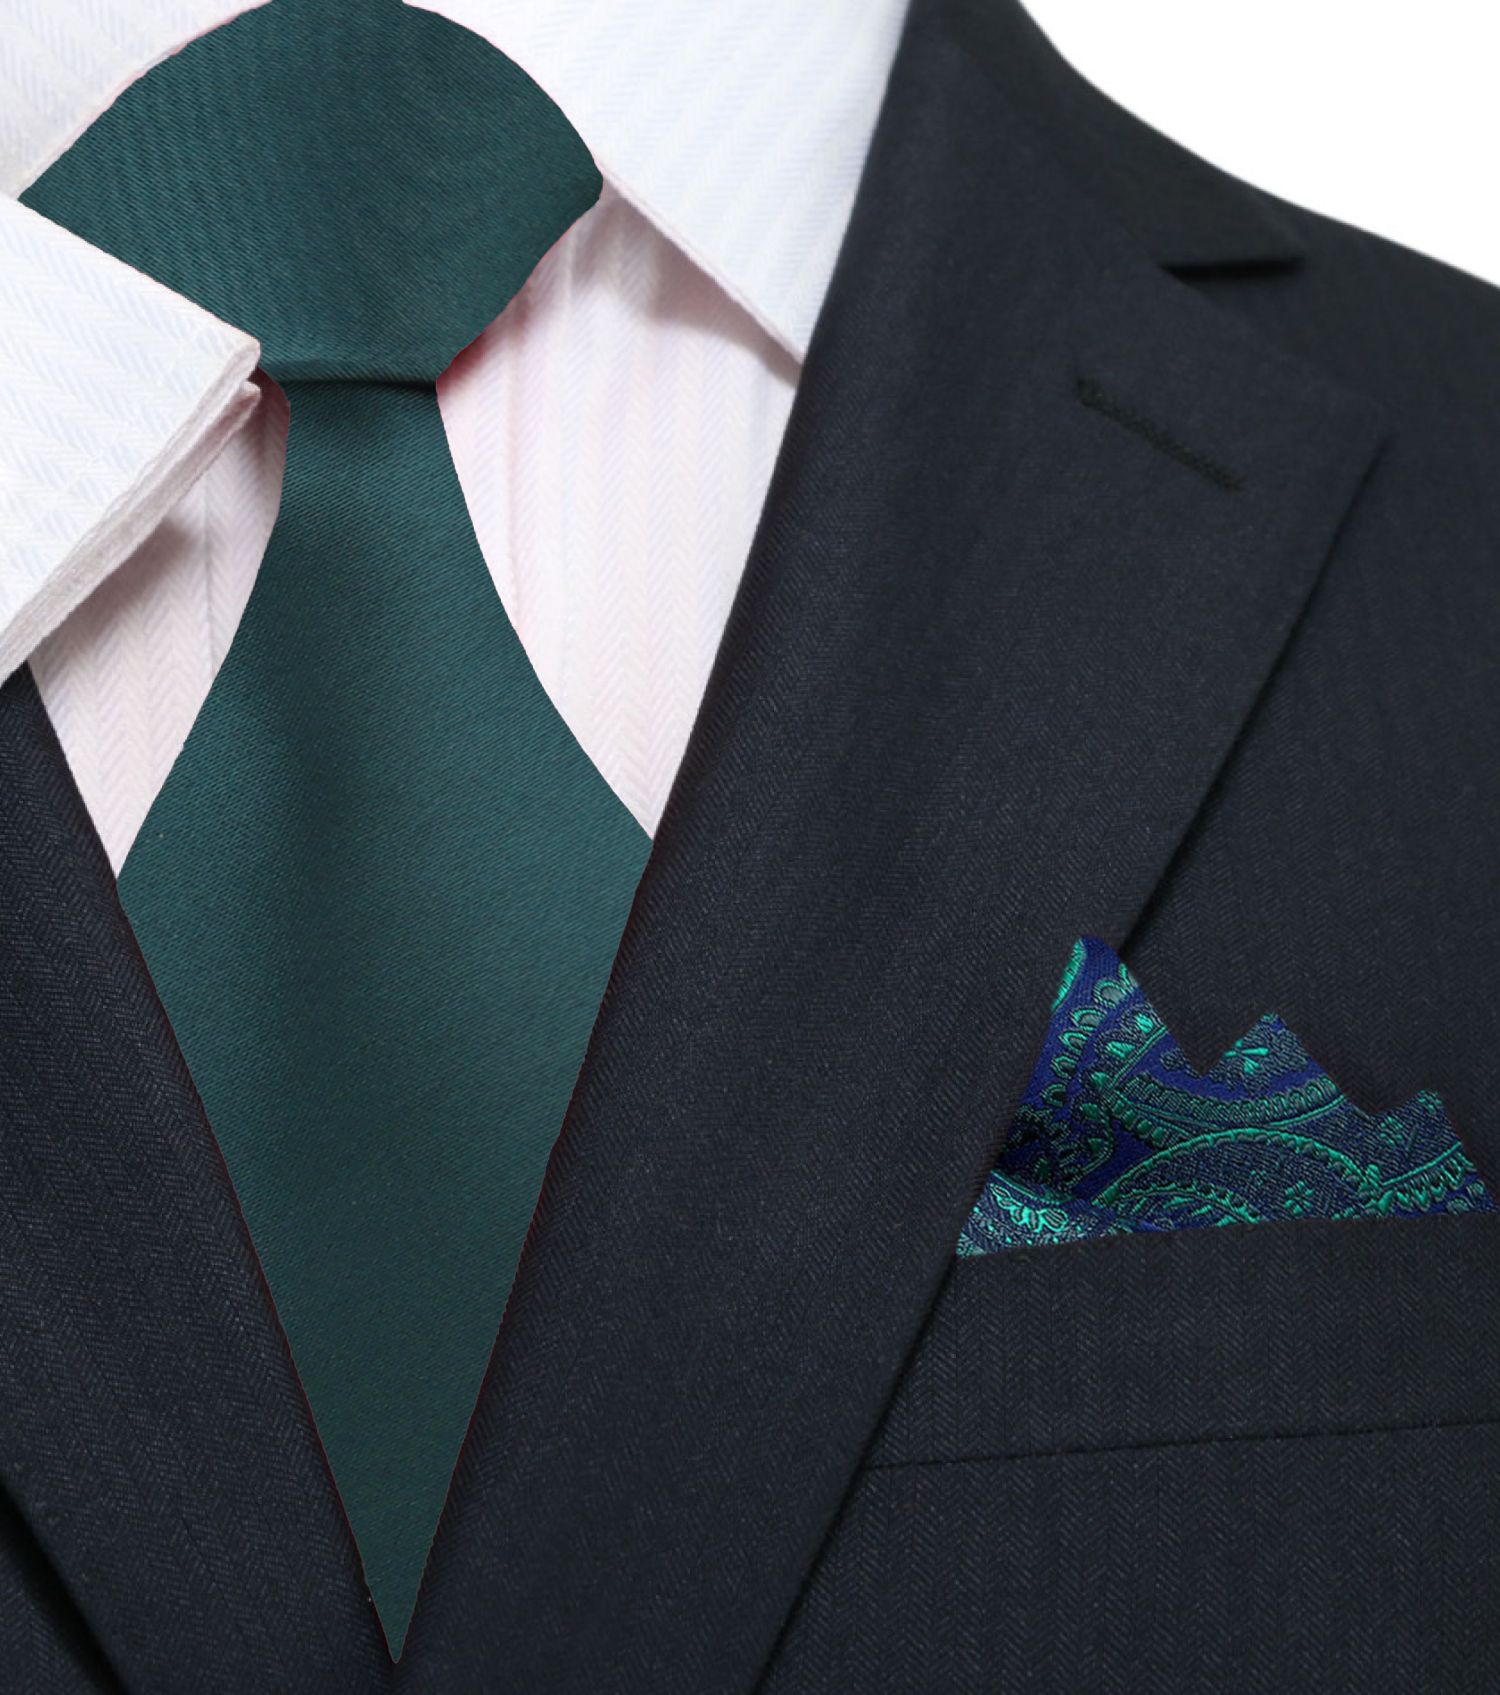 Solid Forest Green Necktie and Accenting Blue and Green Paisley Square